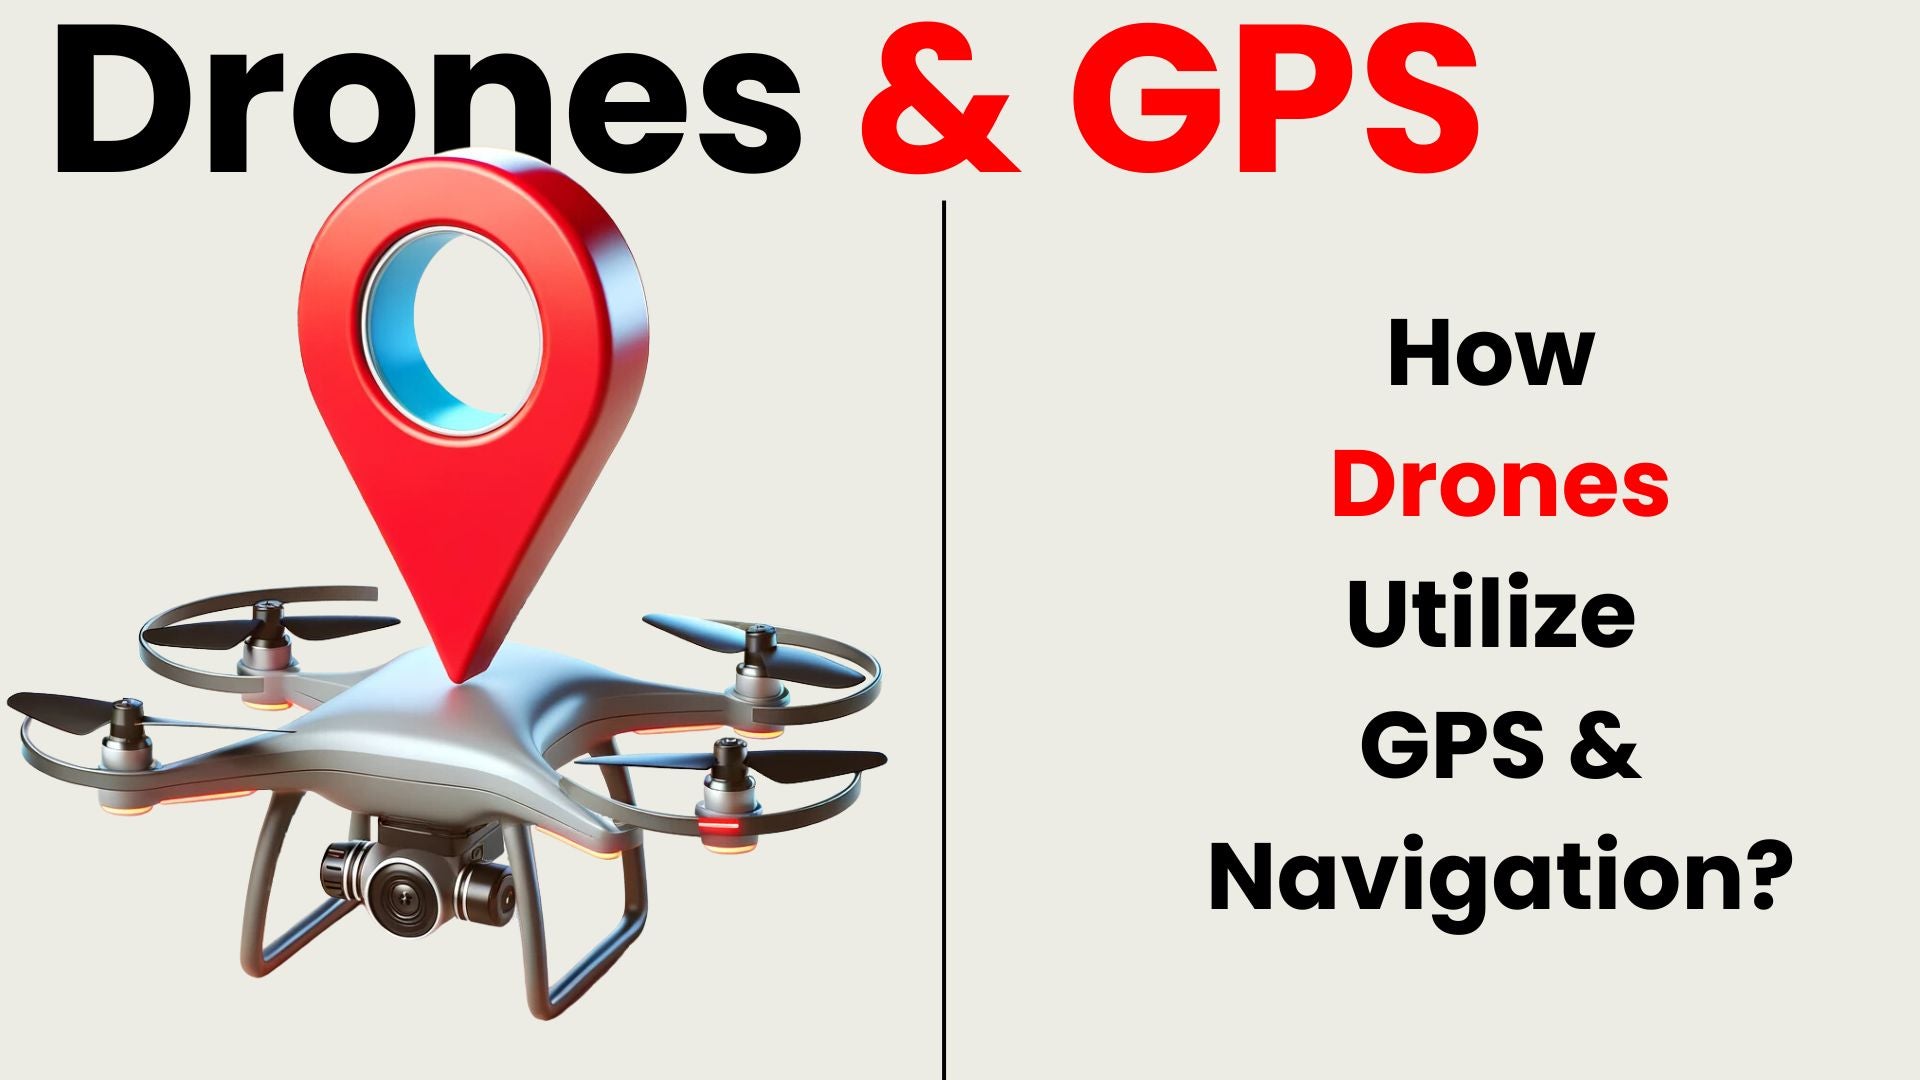 Taking Flight with Precision: How Drones Utilize GPS and Navigation